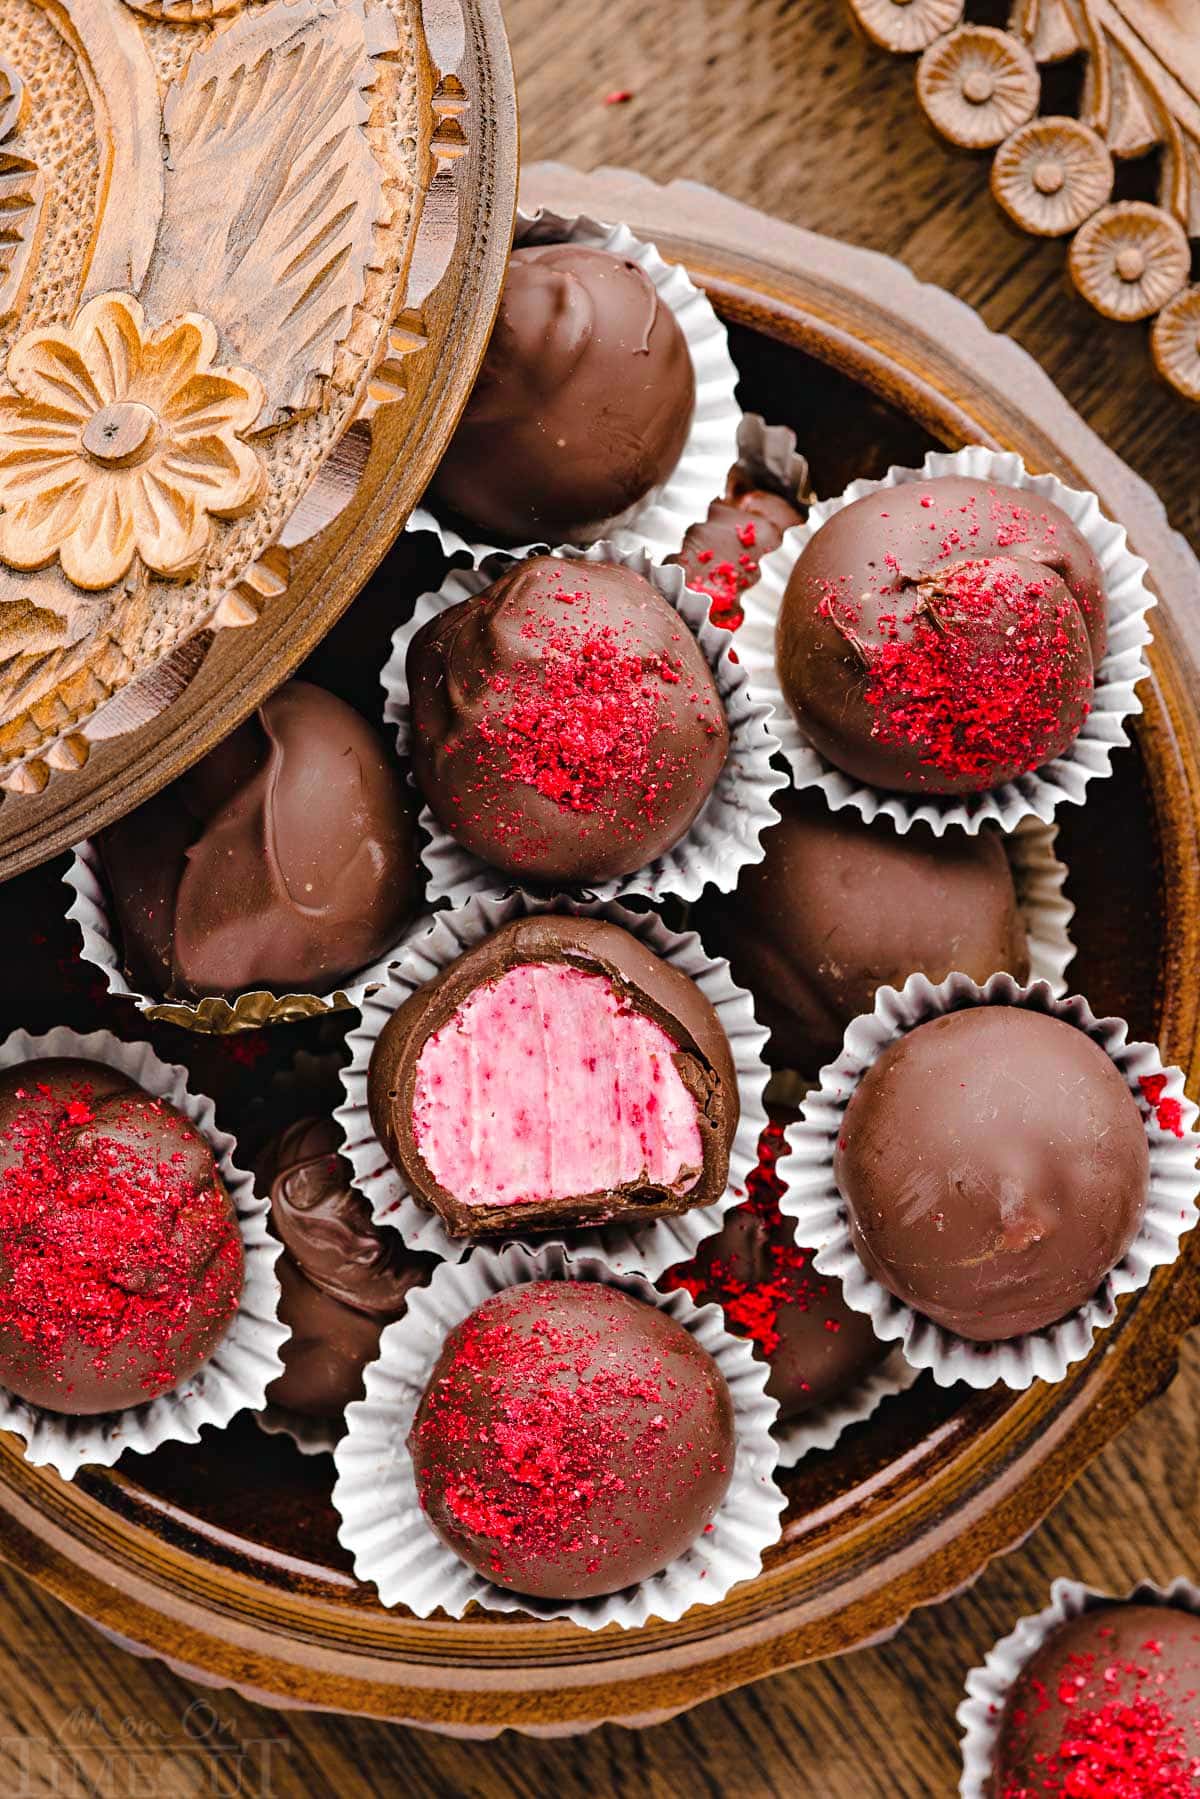 round wooden box filled with raspberry truffles. center truffle has a bite taken out of it. some of the truffles are topped with freeze dried raspberry dust.